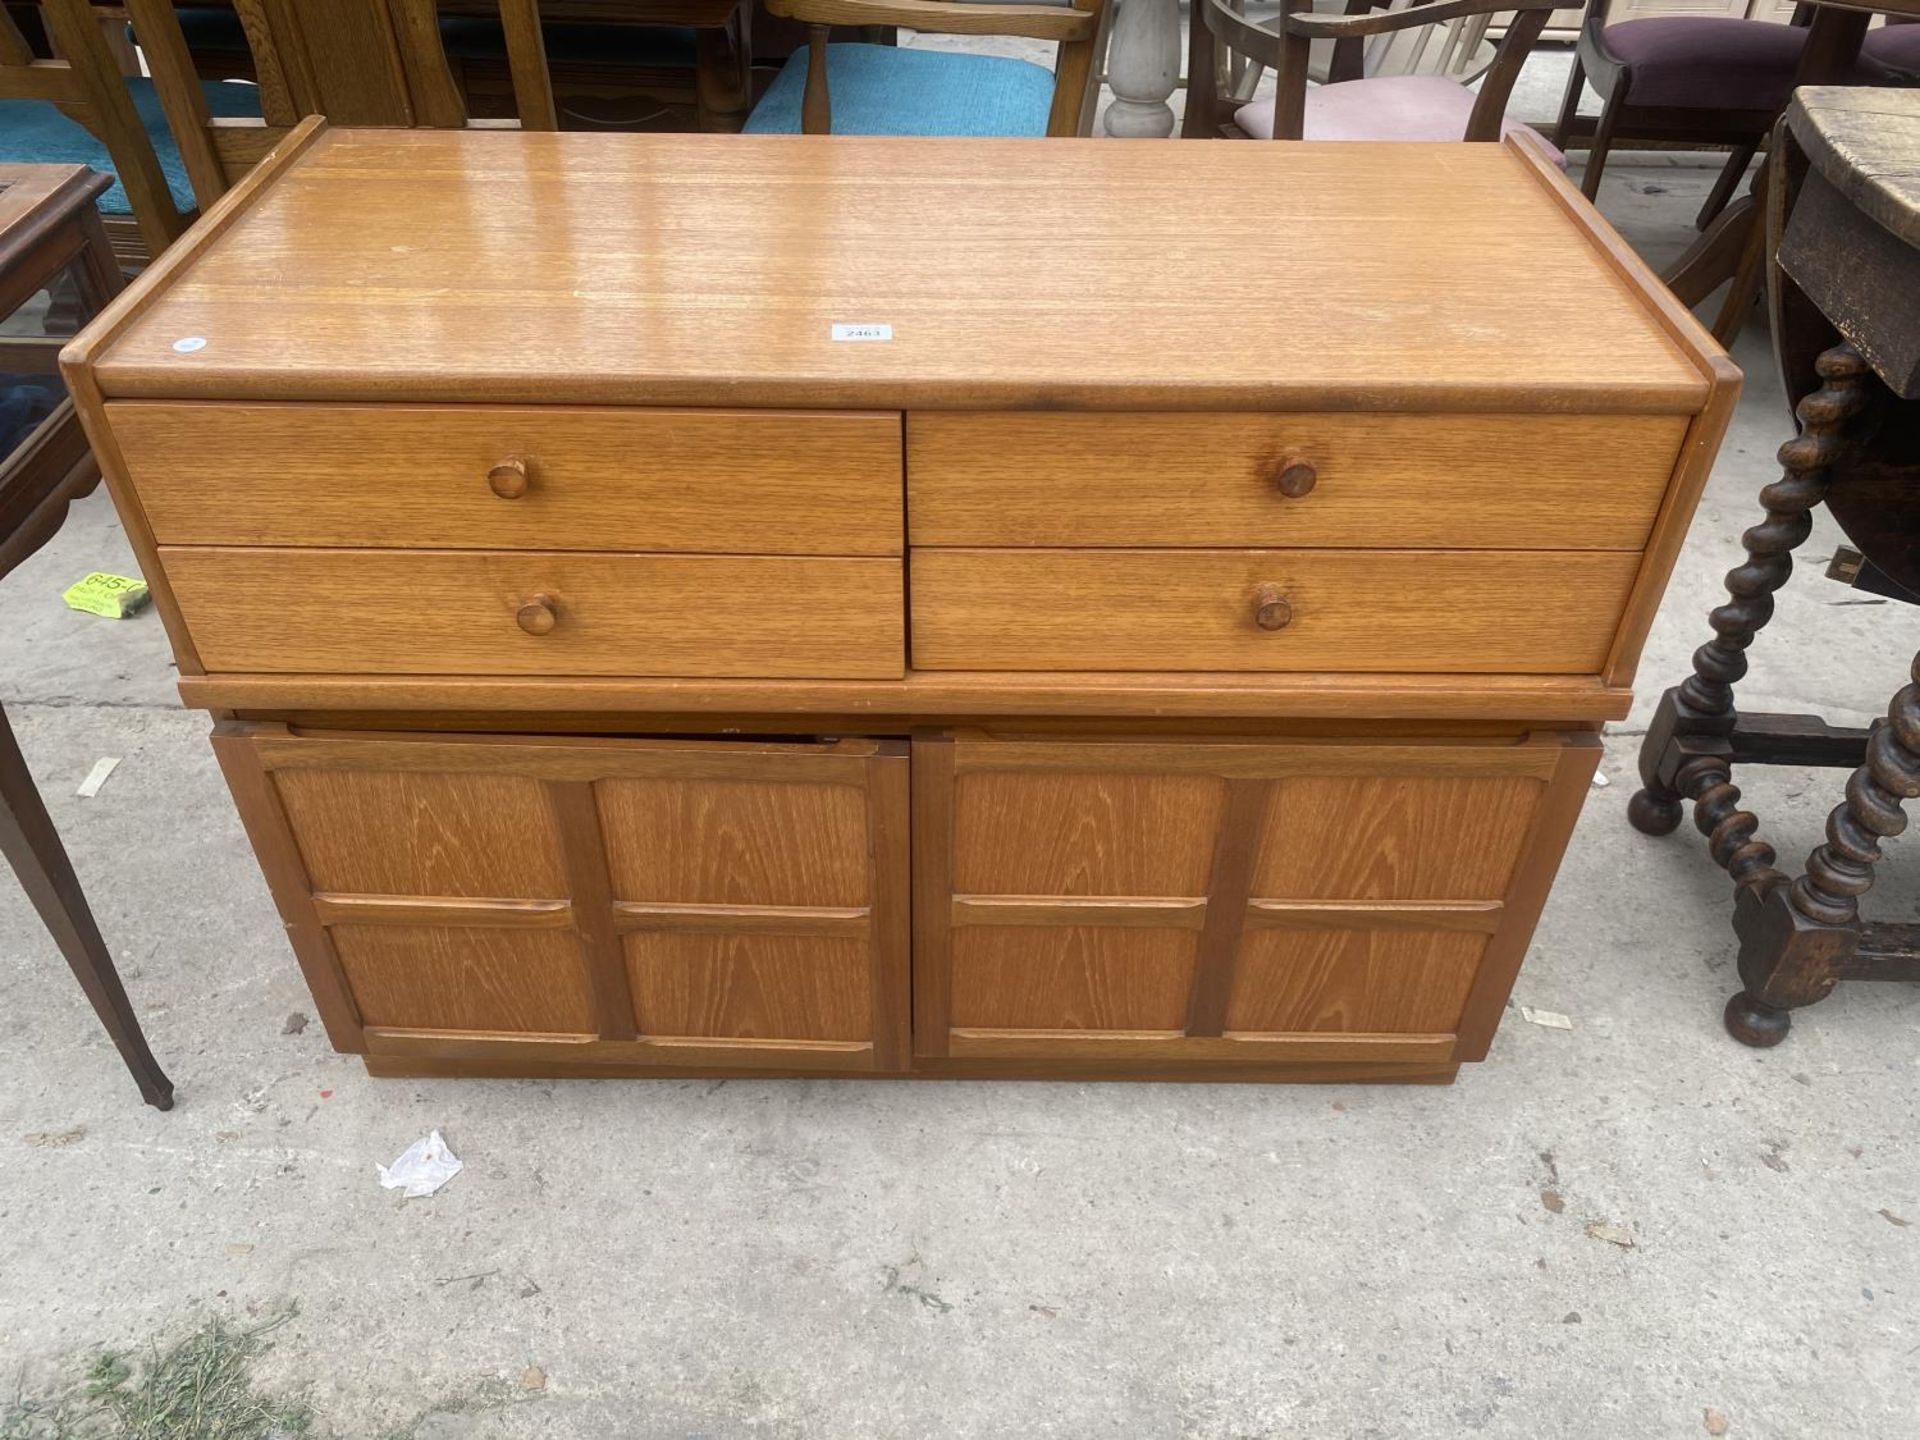 A RETRO NATHAN TEAK UNIT 40 INCHES WIDE